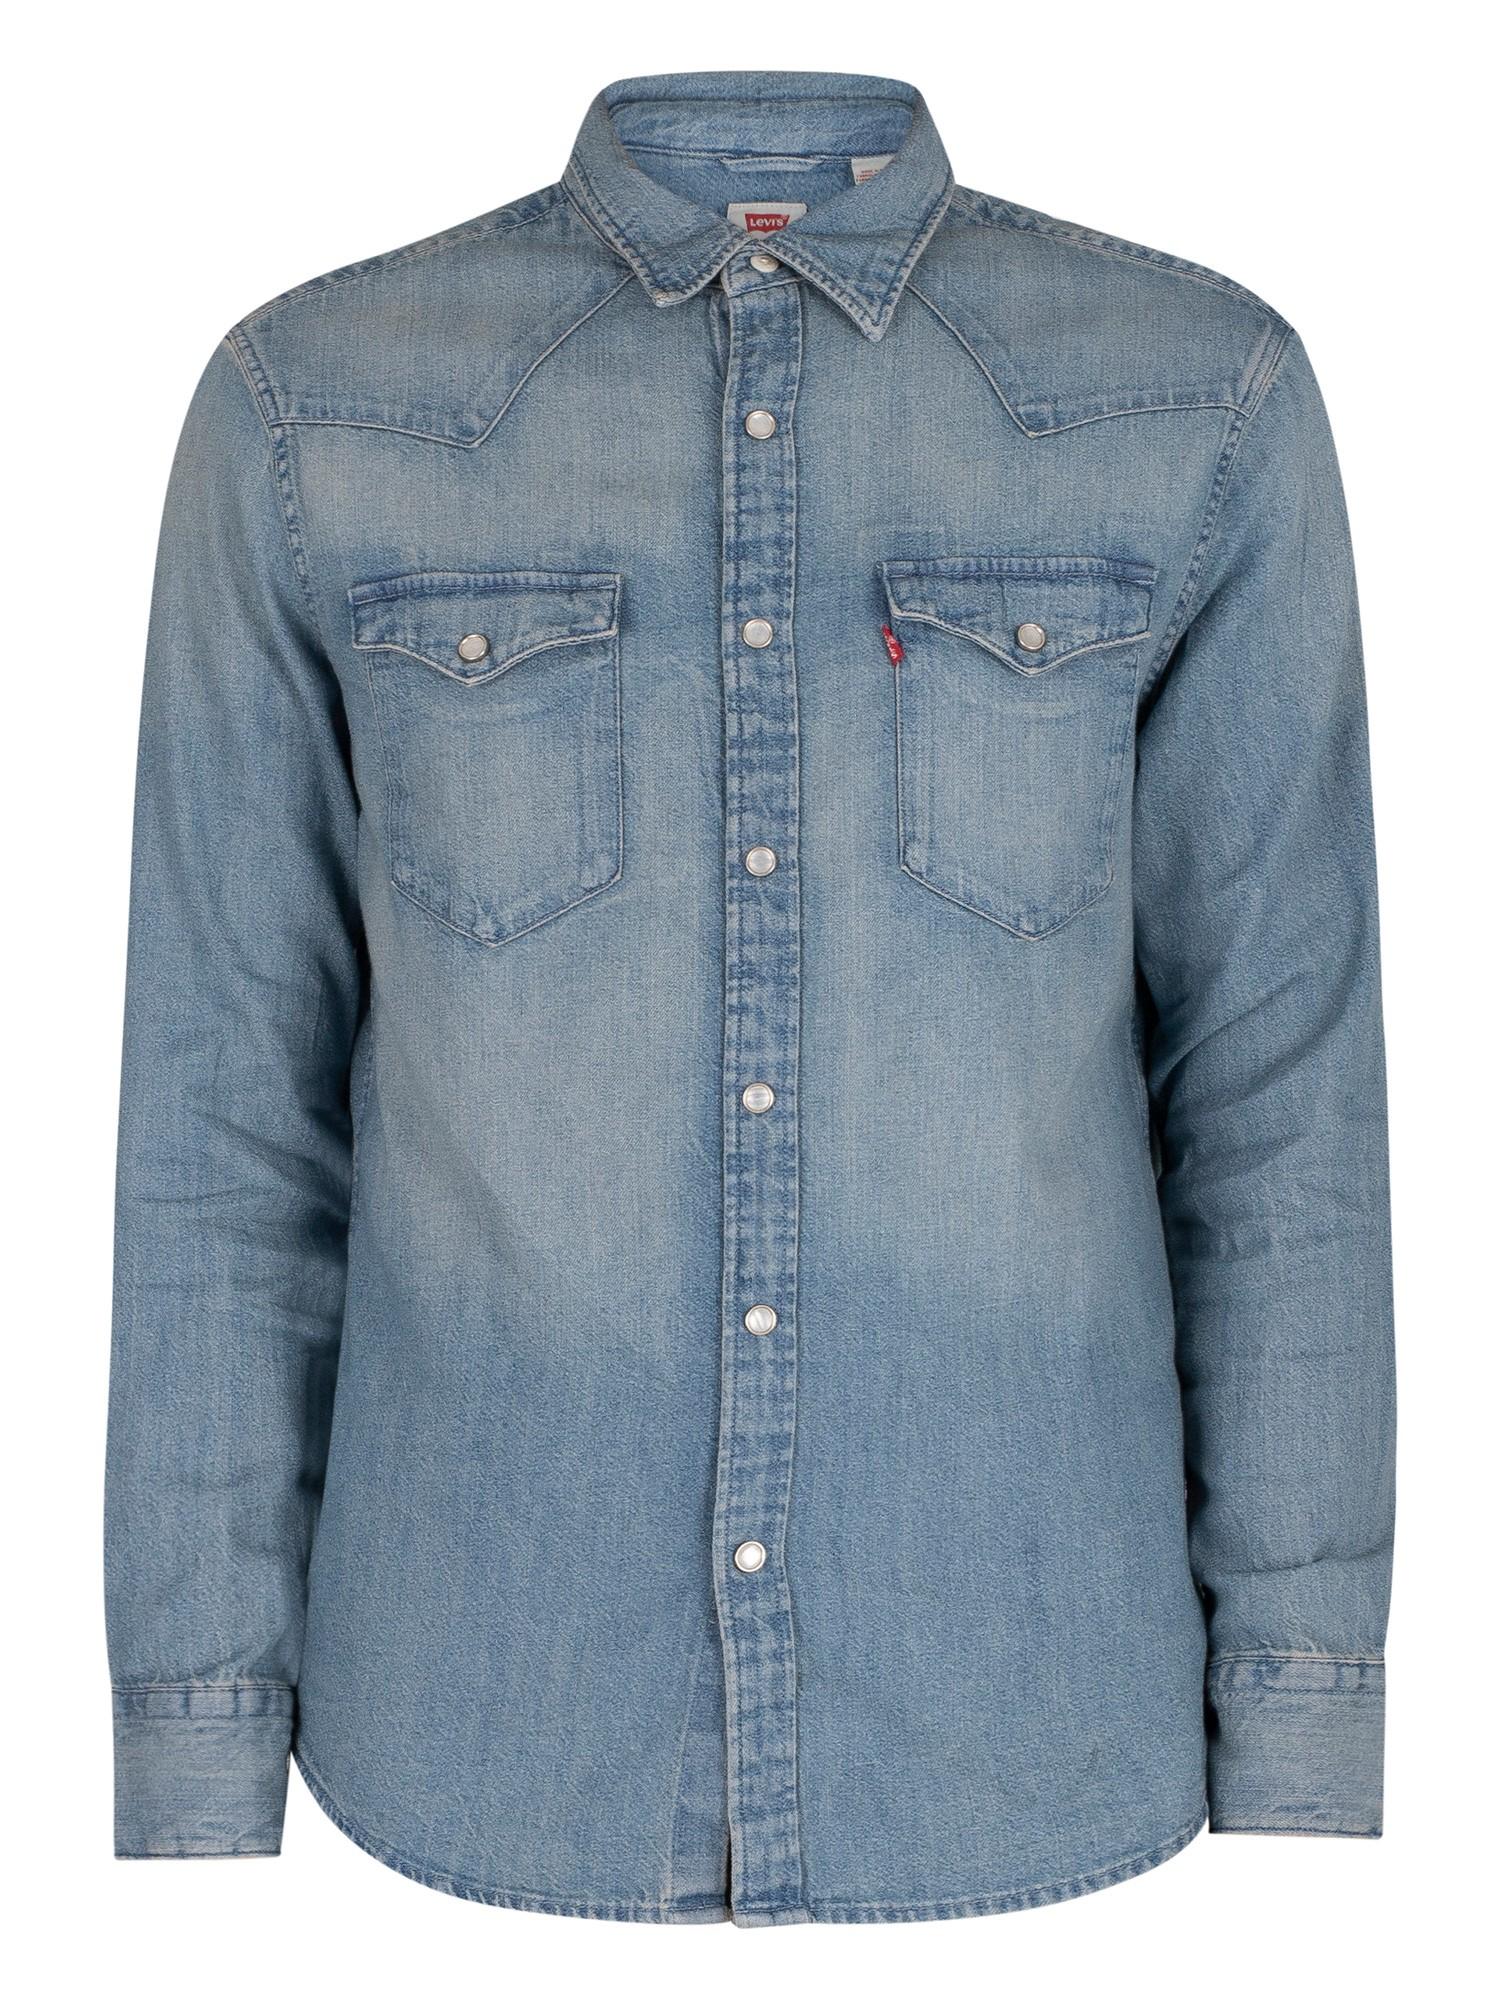 Levi's Barstow Western Standard Shirt in Blue for Men - Lyst